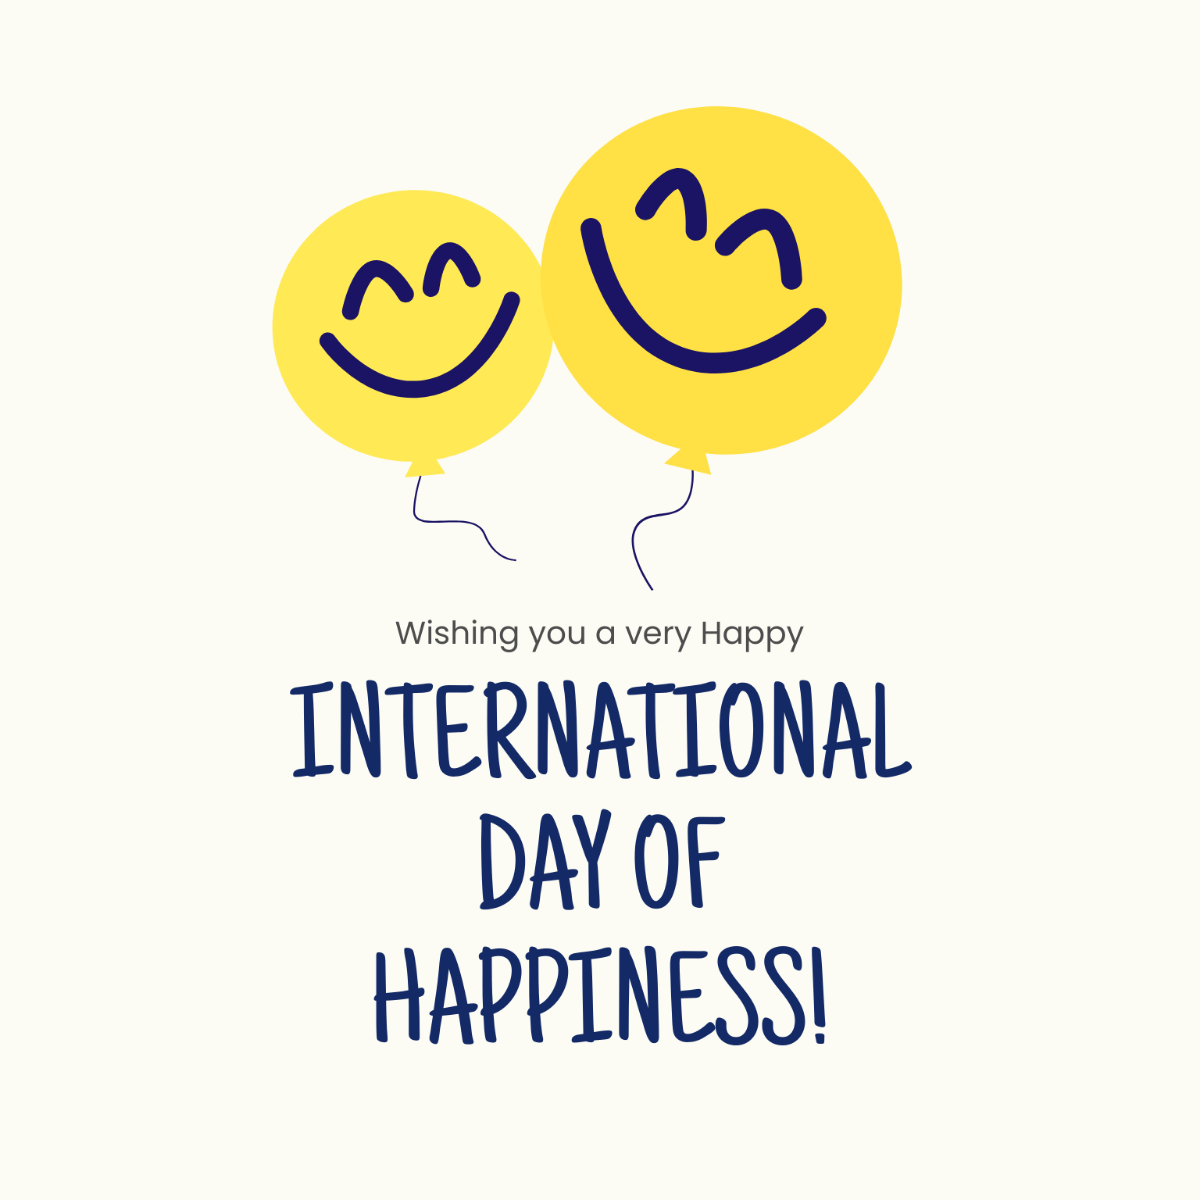 Free International Day of Happiness Wishes Vector Template